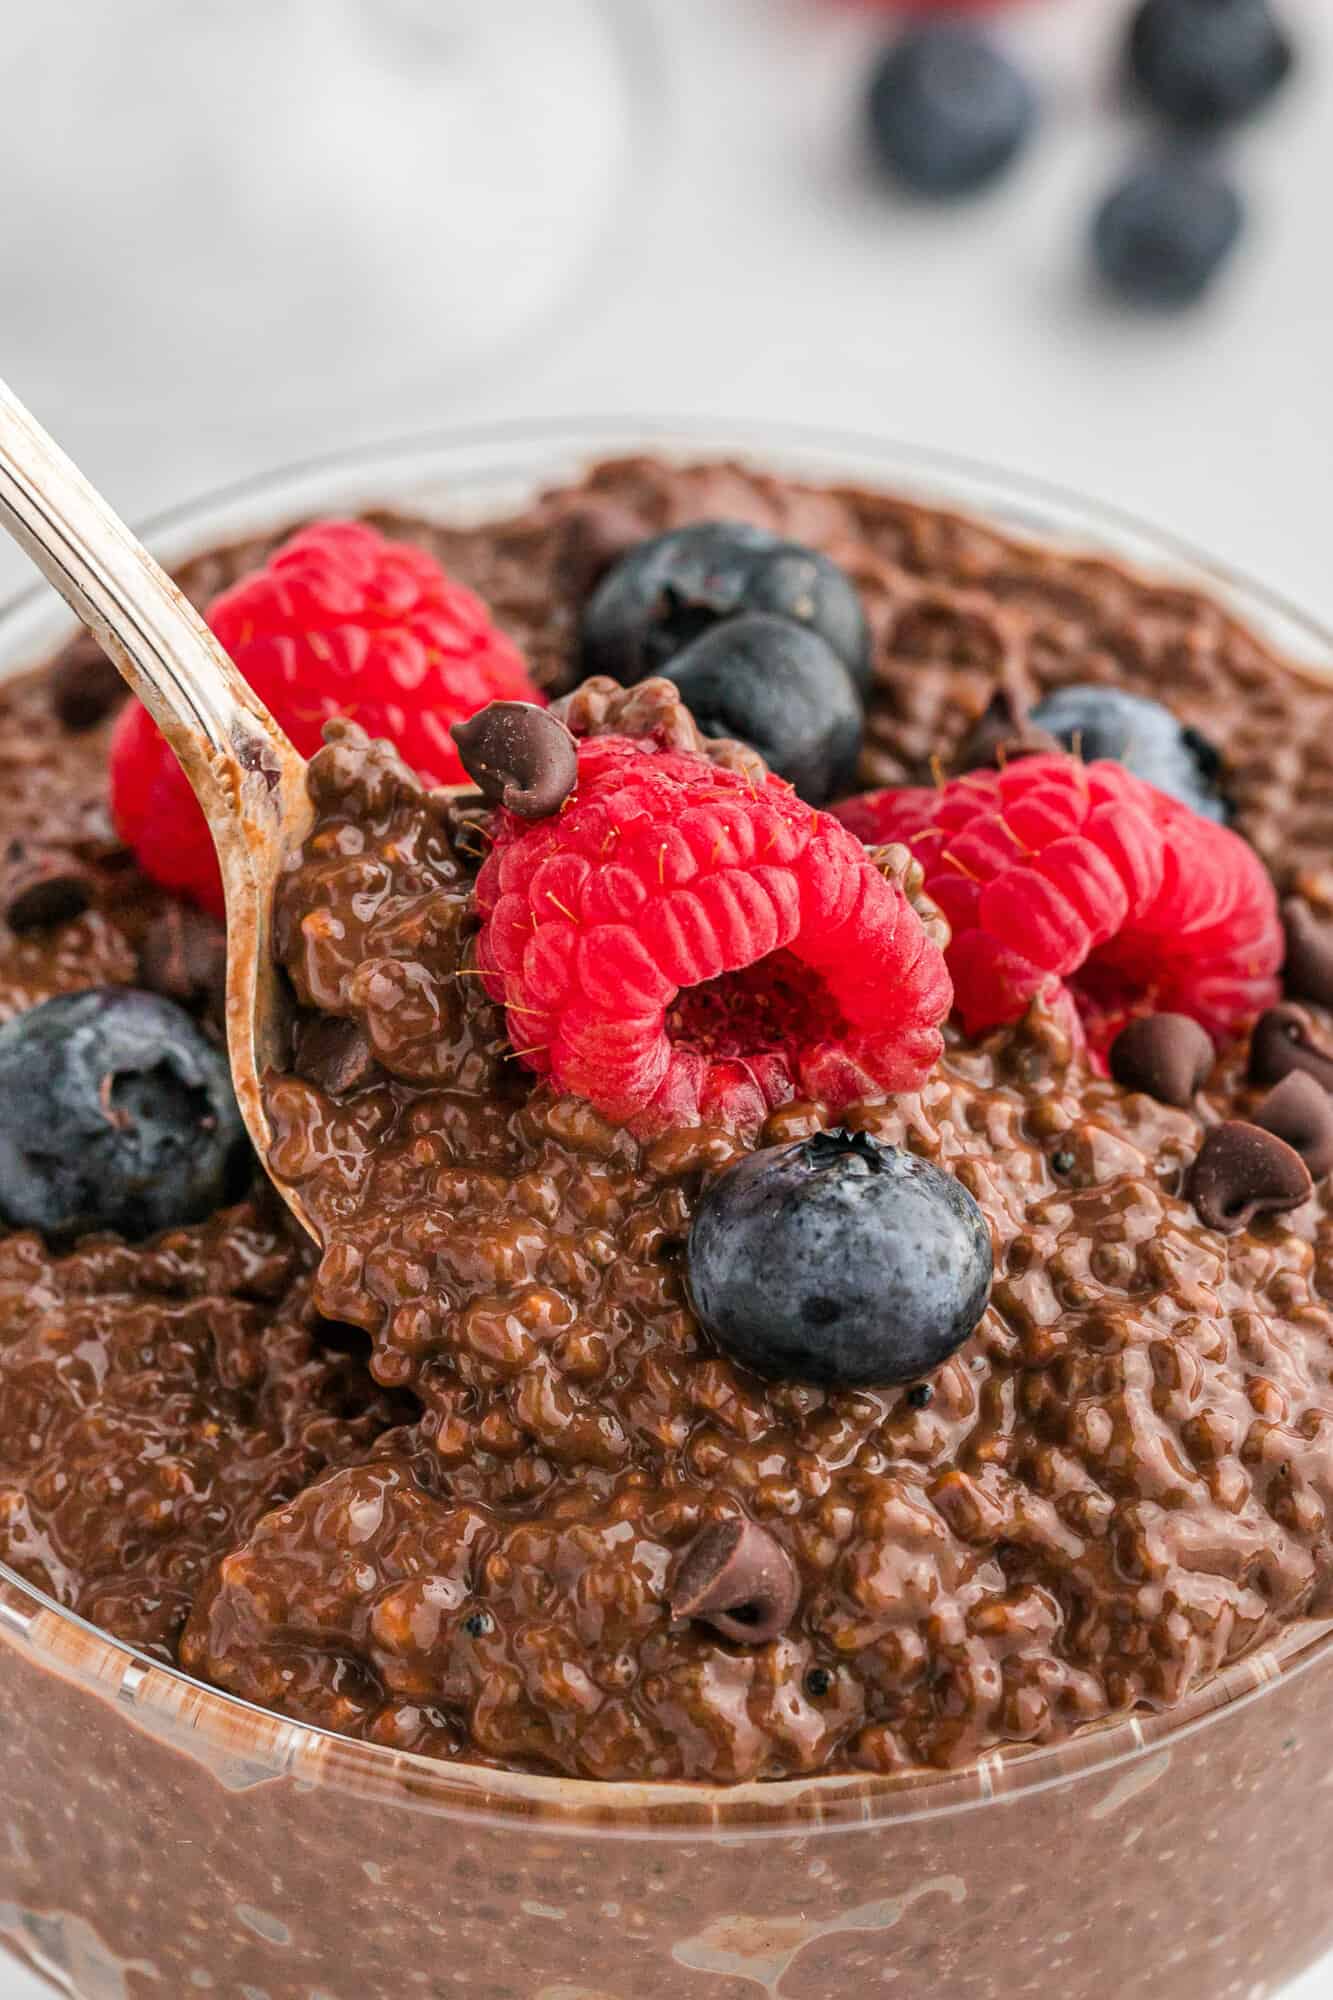 Chocolate chia pudding with spoon to show texture.